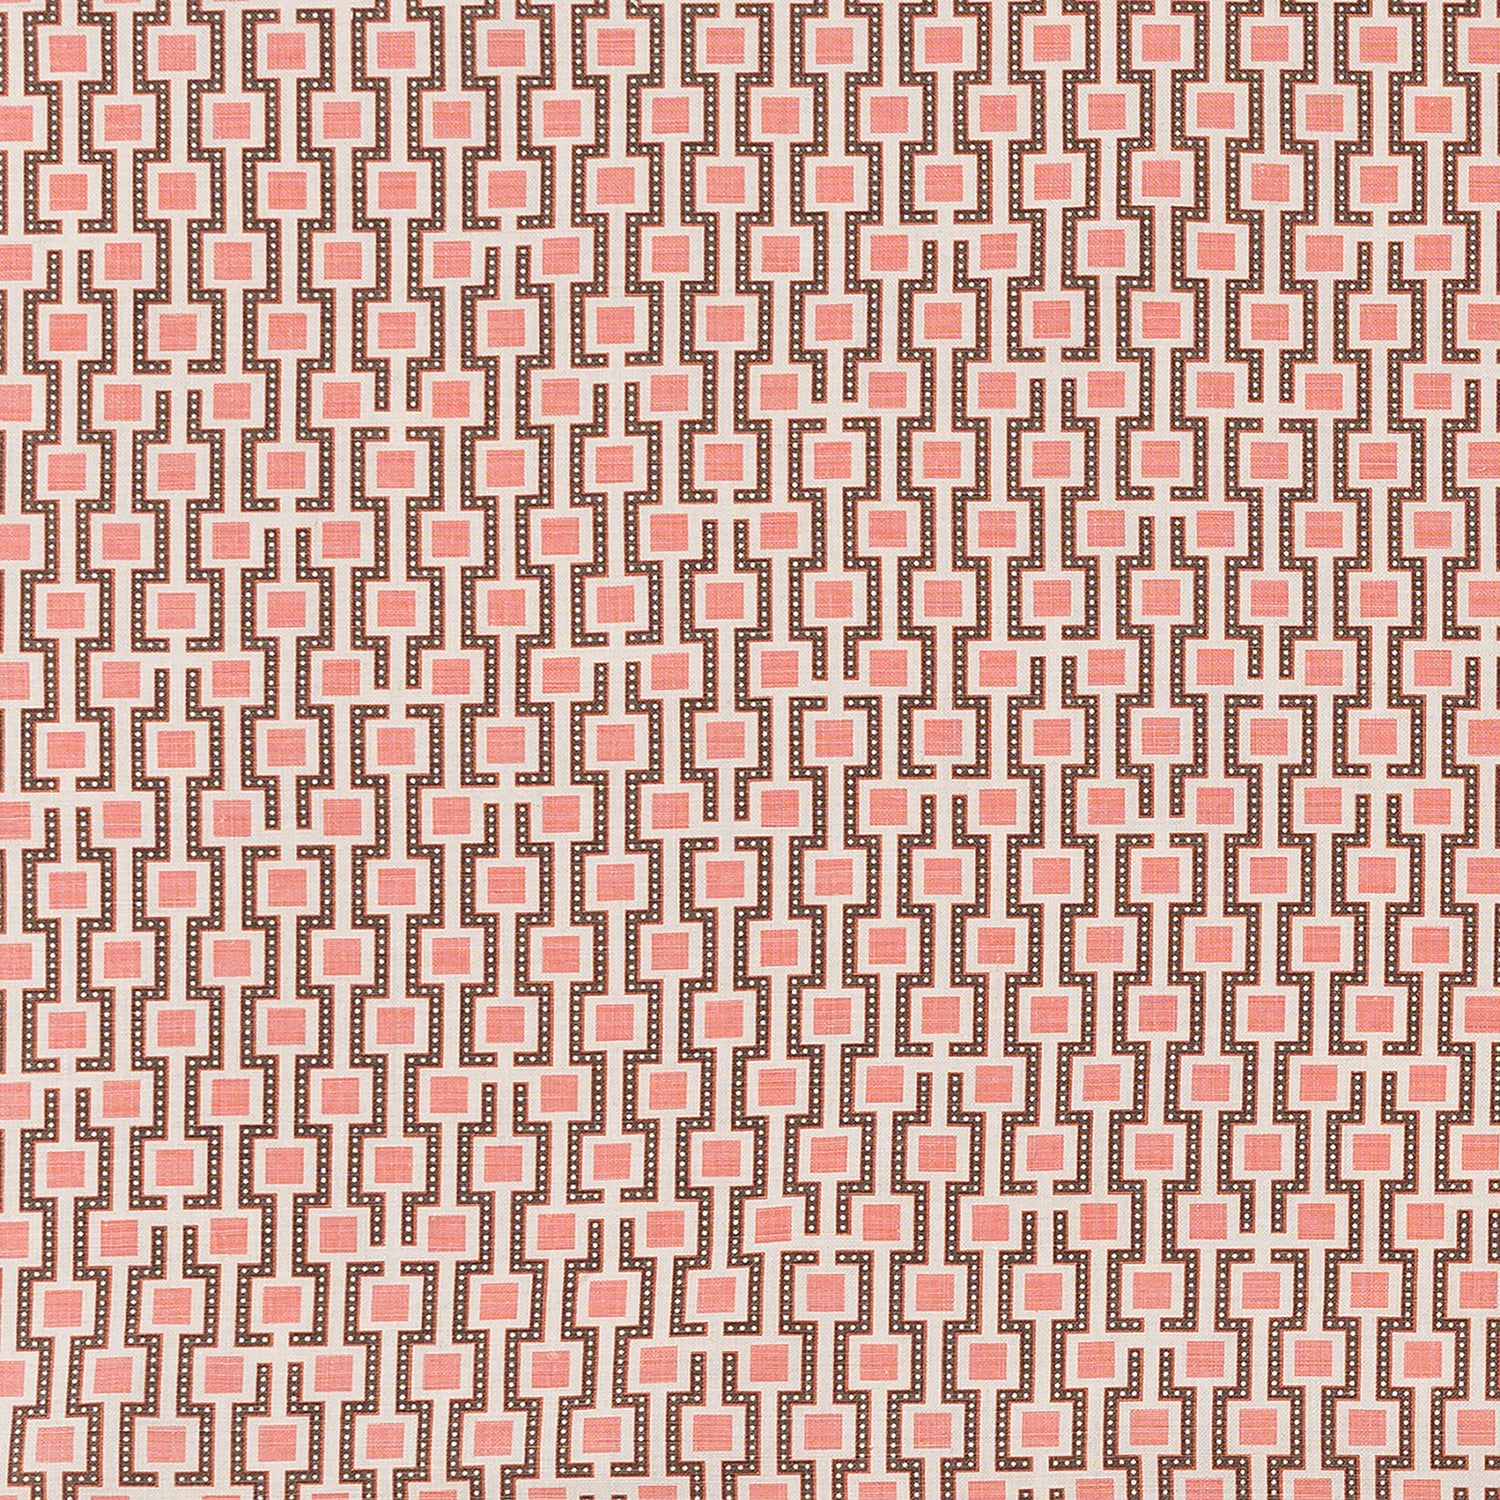 Fabric in a geometric grid print in shades of pink and brown on a tan field.